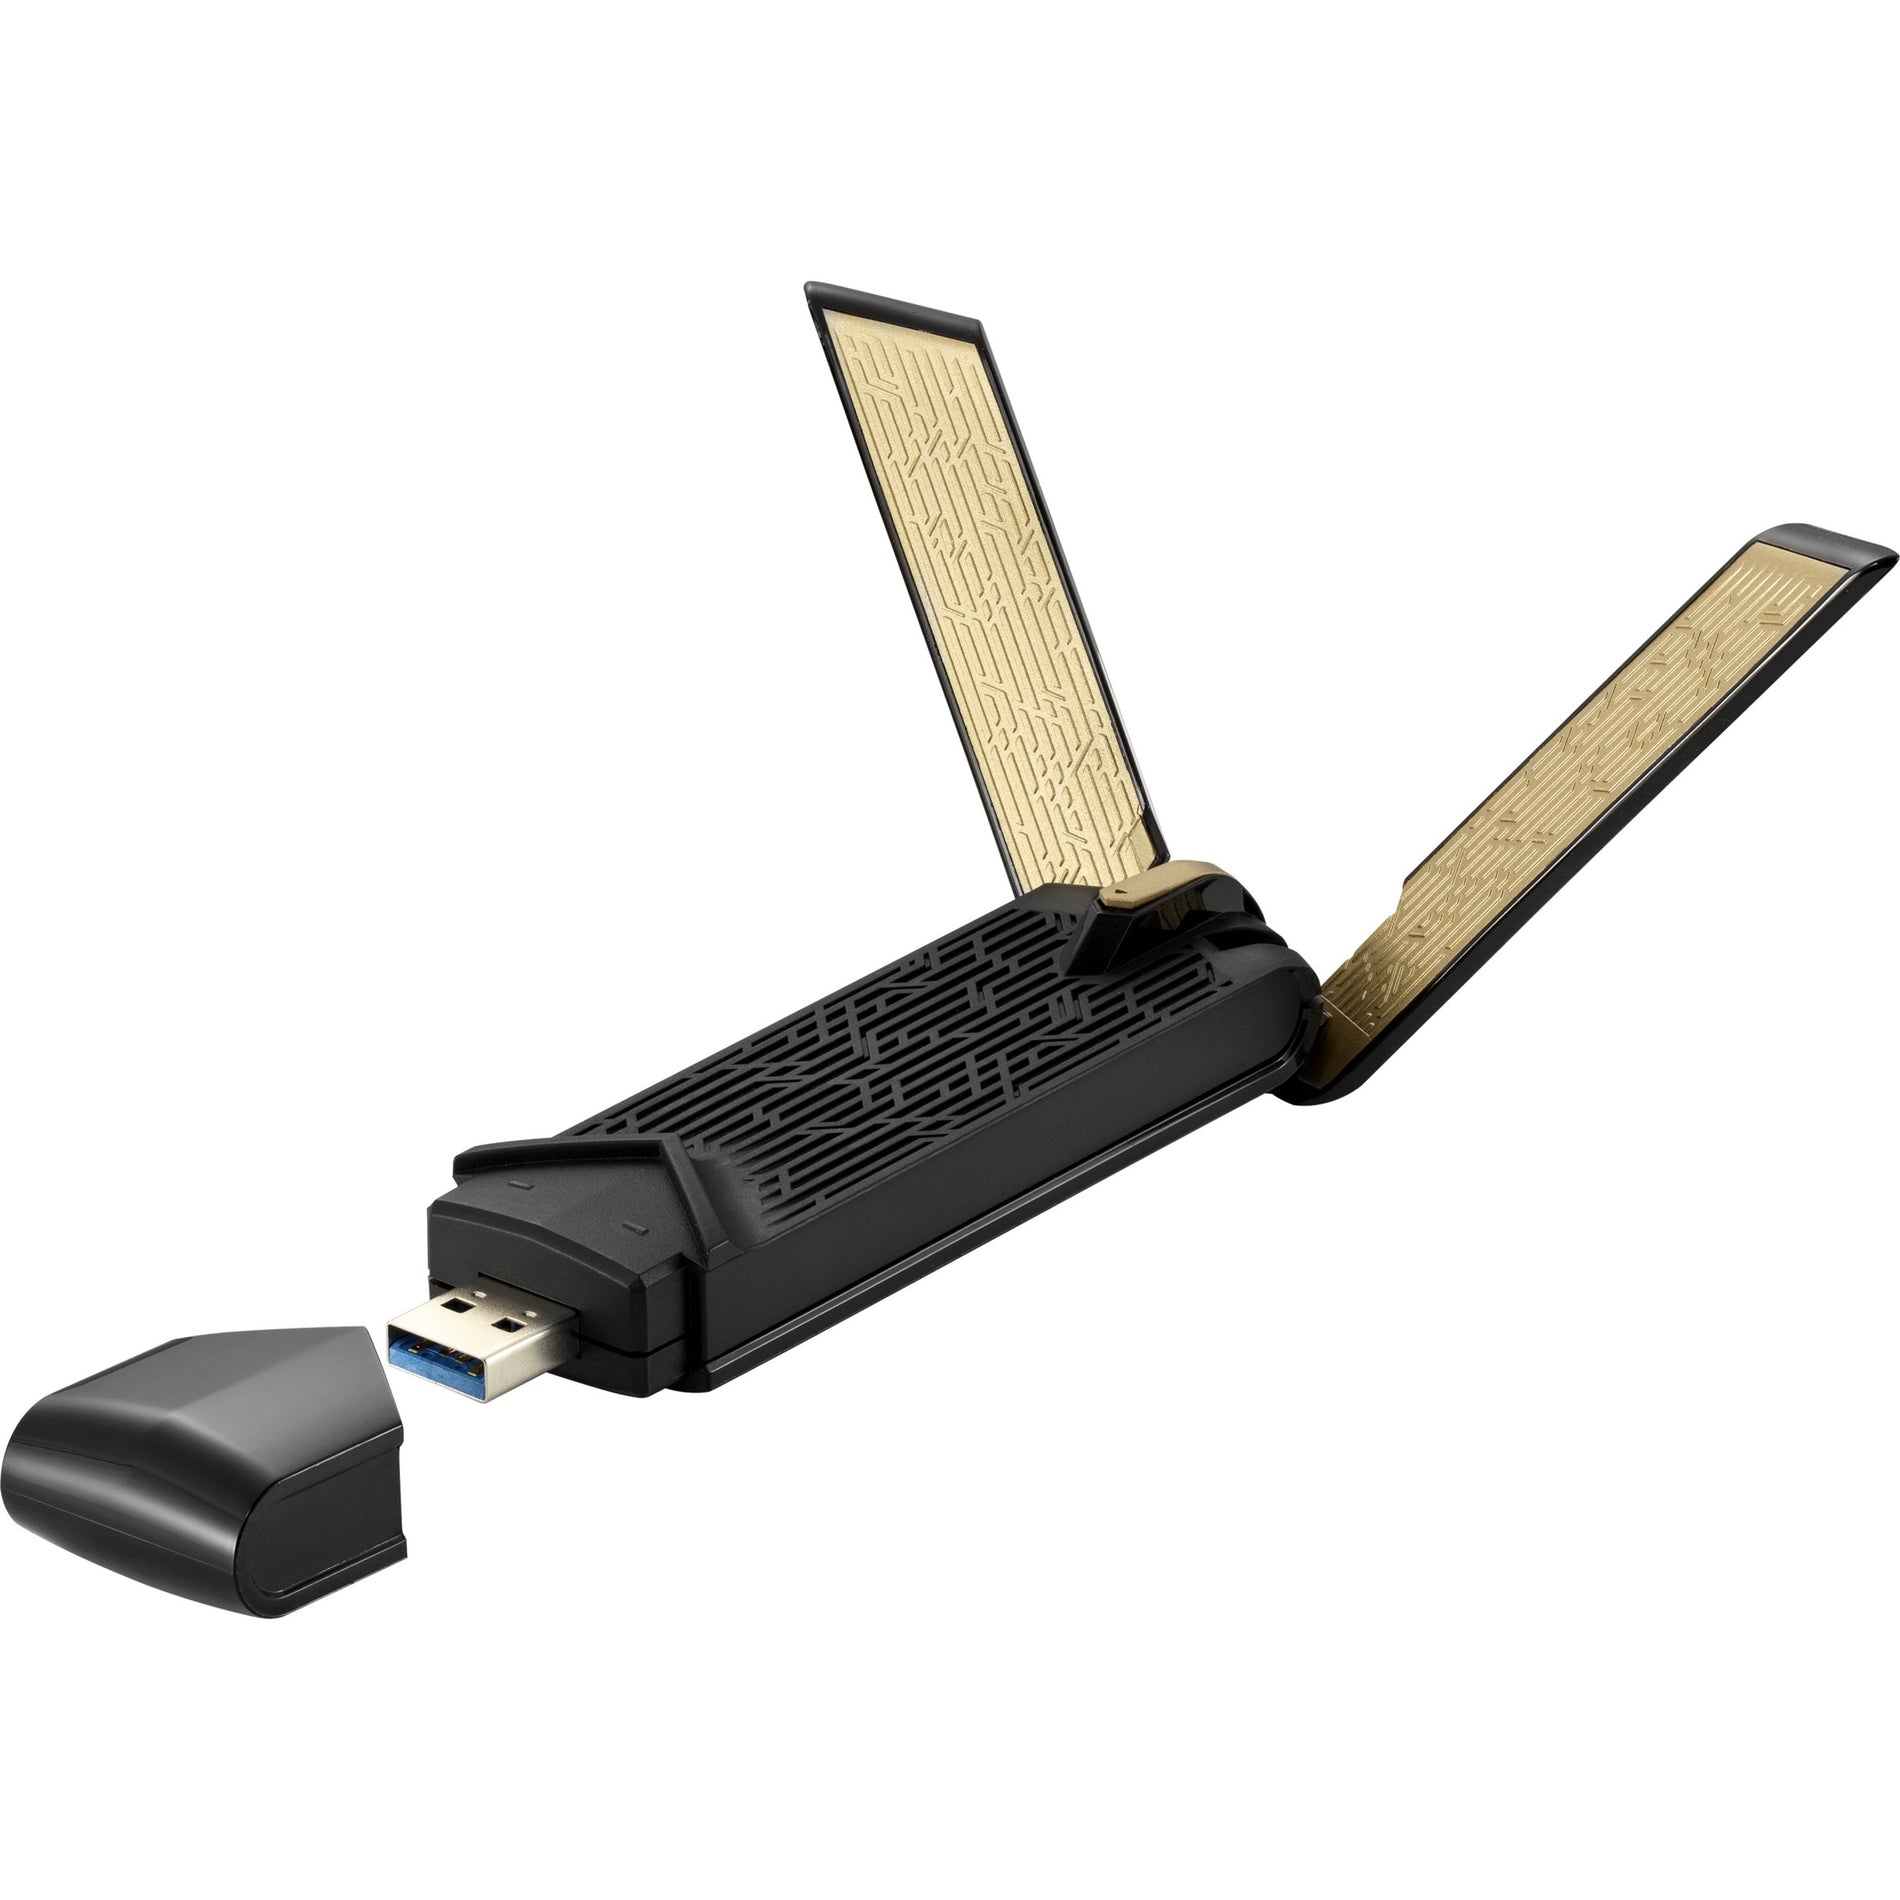 Asus USB-AX56 Dual Band AX1800 USB WiFi Adapter, Upgrade Your Laptop or PC to WiFi 6